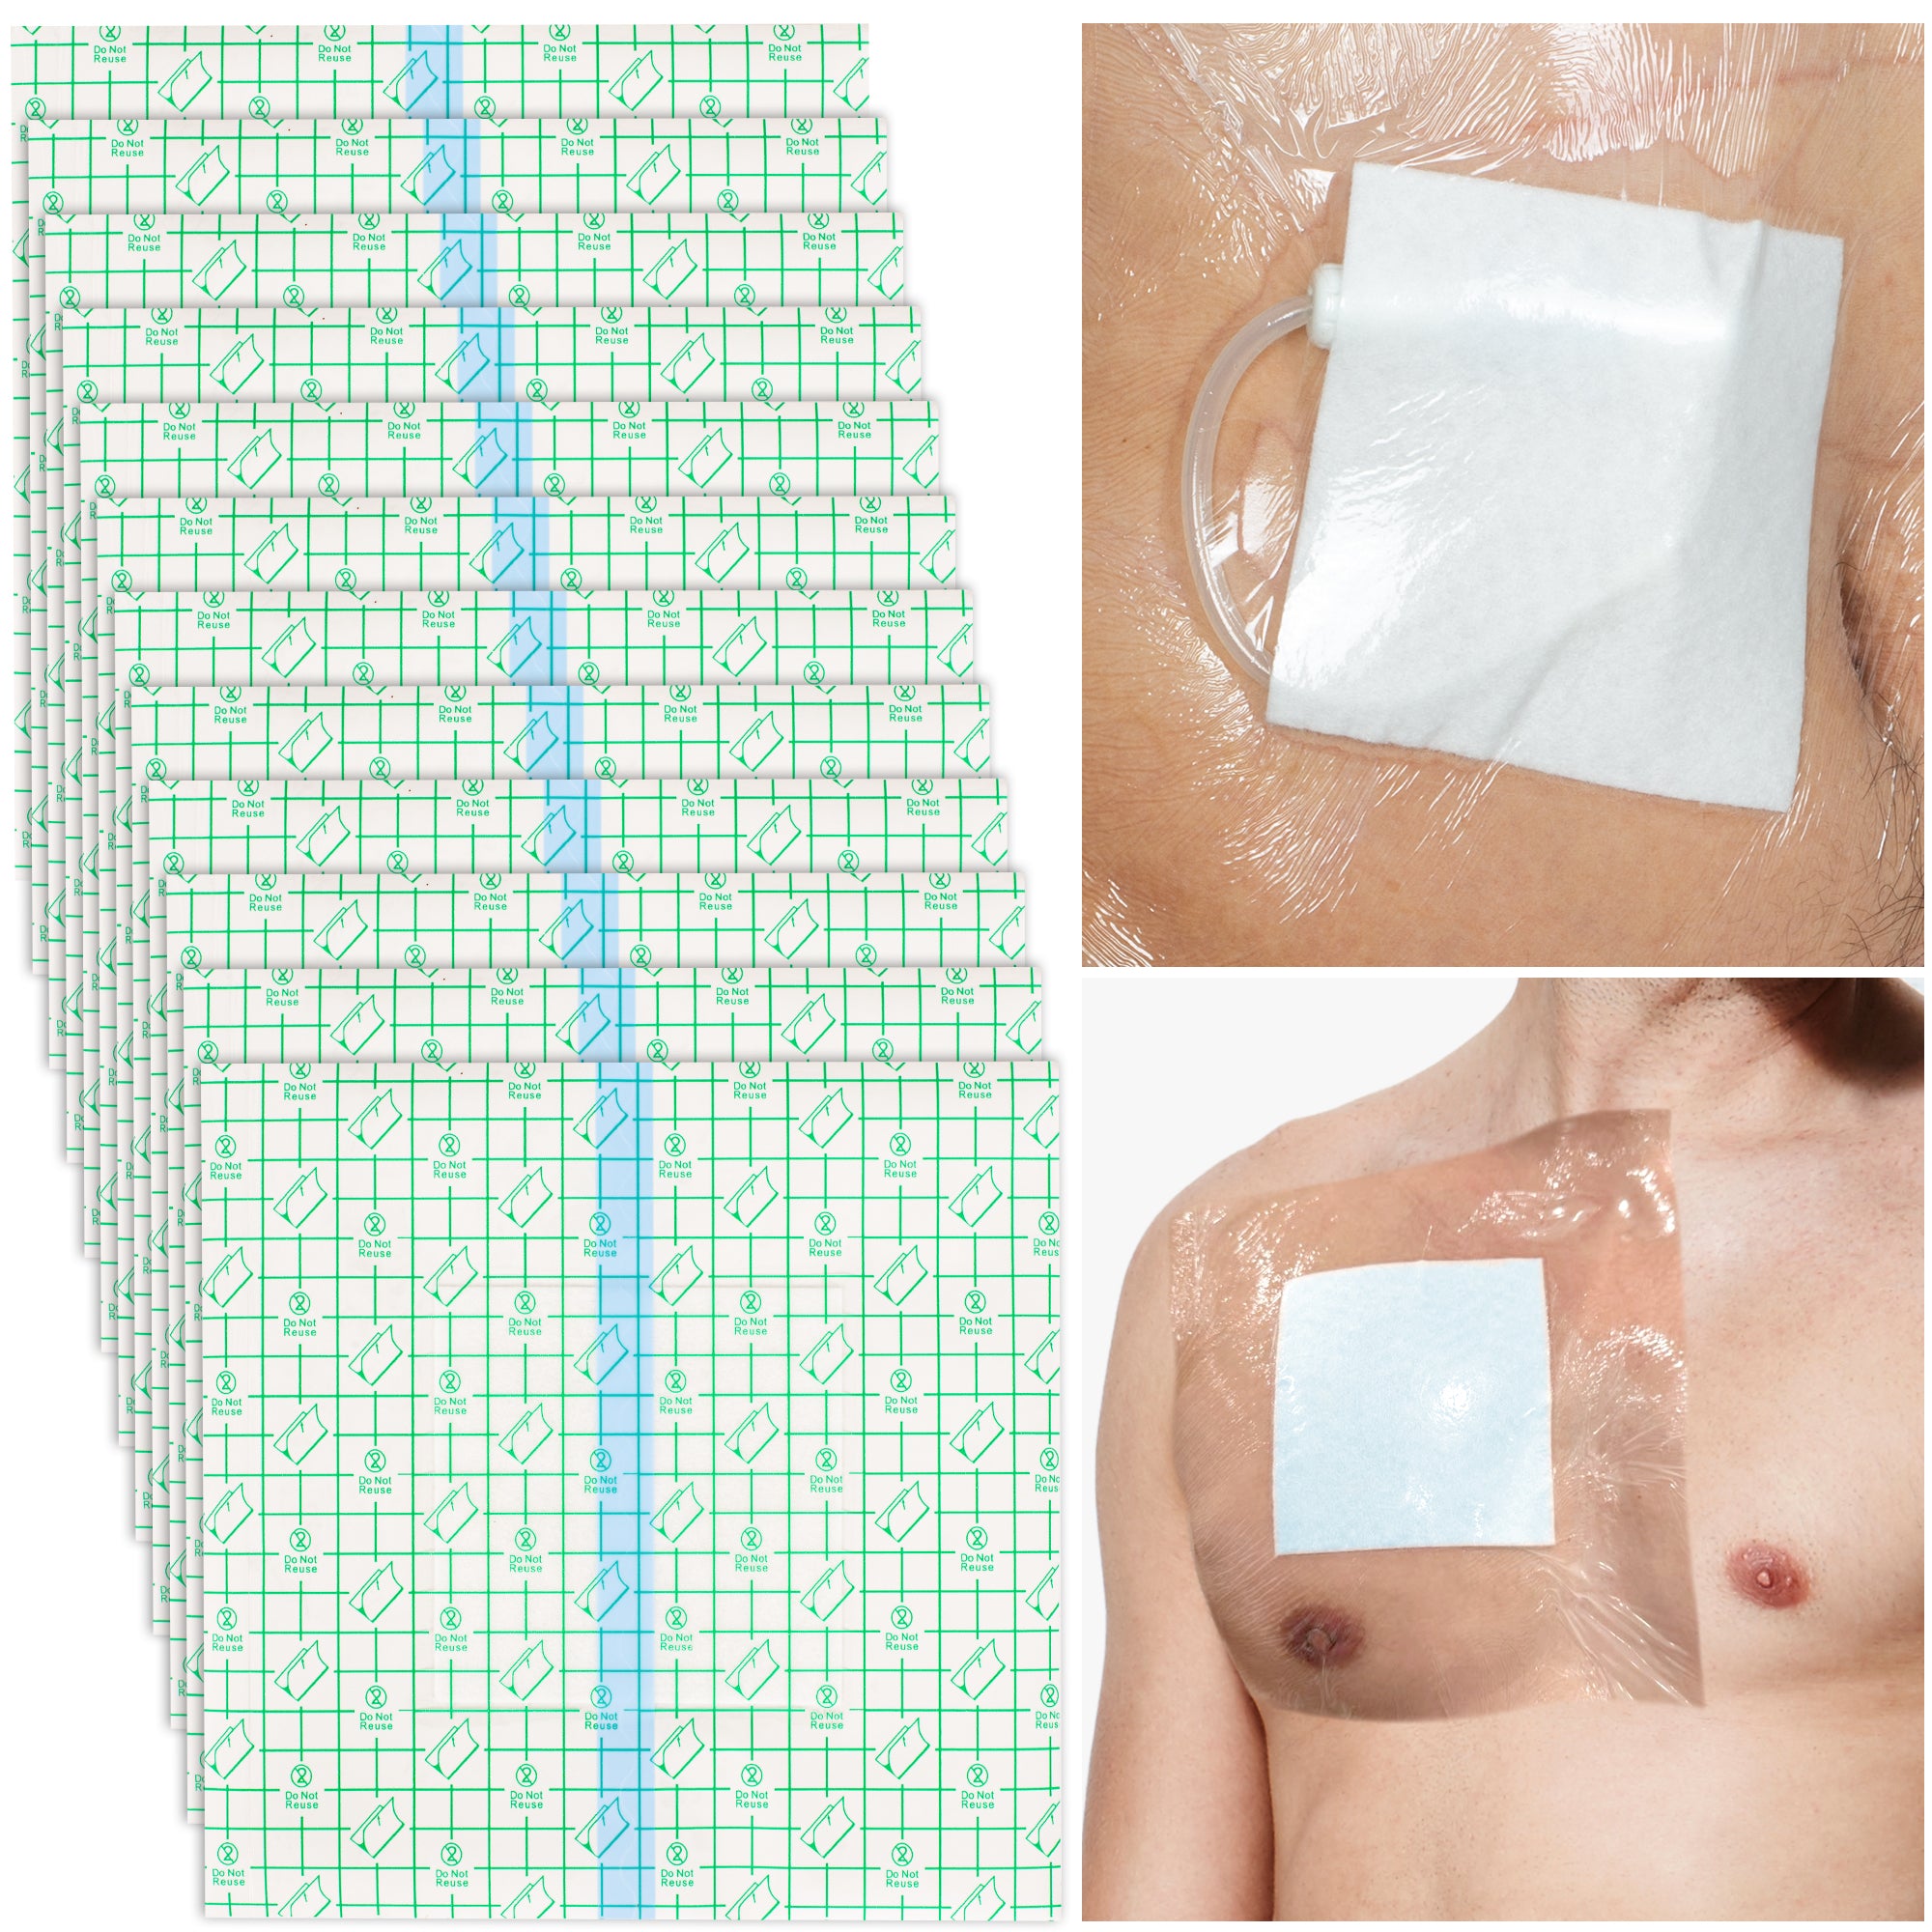 Shower Water Proof Dressing for Hemodialysis Peritoneal Dialysis Catheter, Central Lines Shower Cover